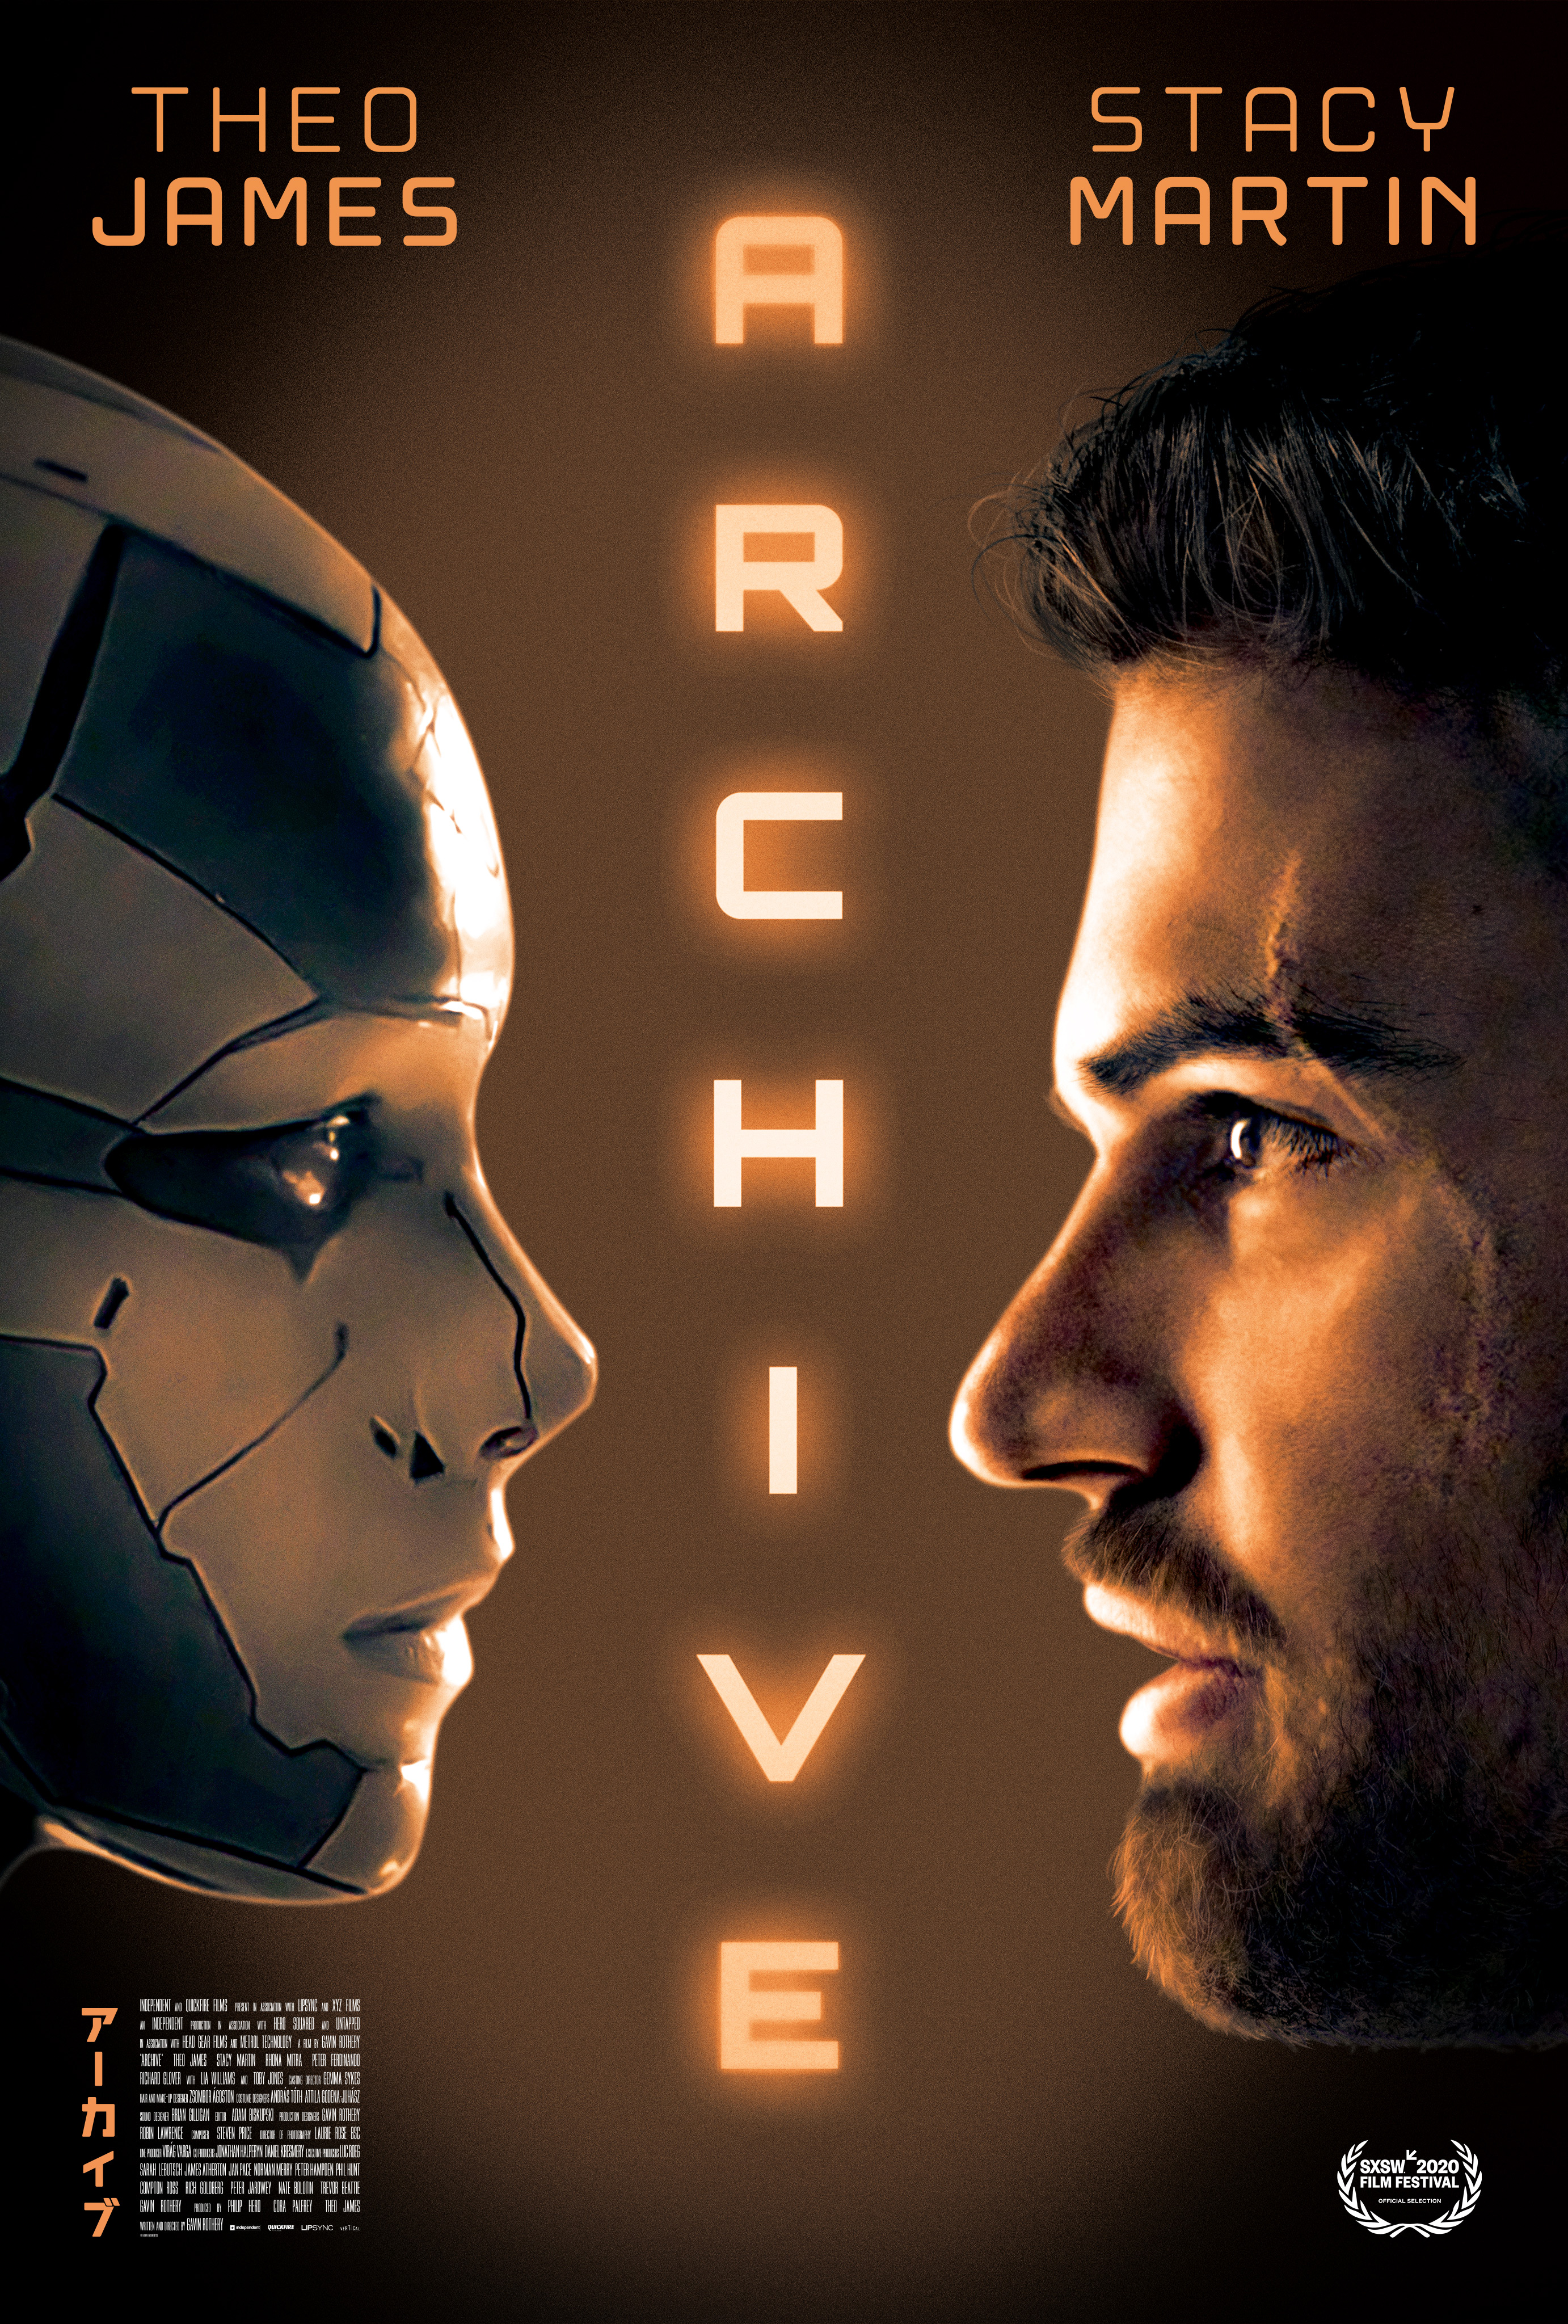 Archive 2020 Dual Audio Hindi ORG 1080p 720p 480p BluRay x264 ESubs Full Movie Download